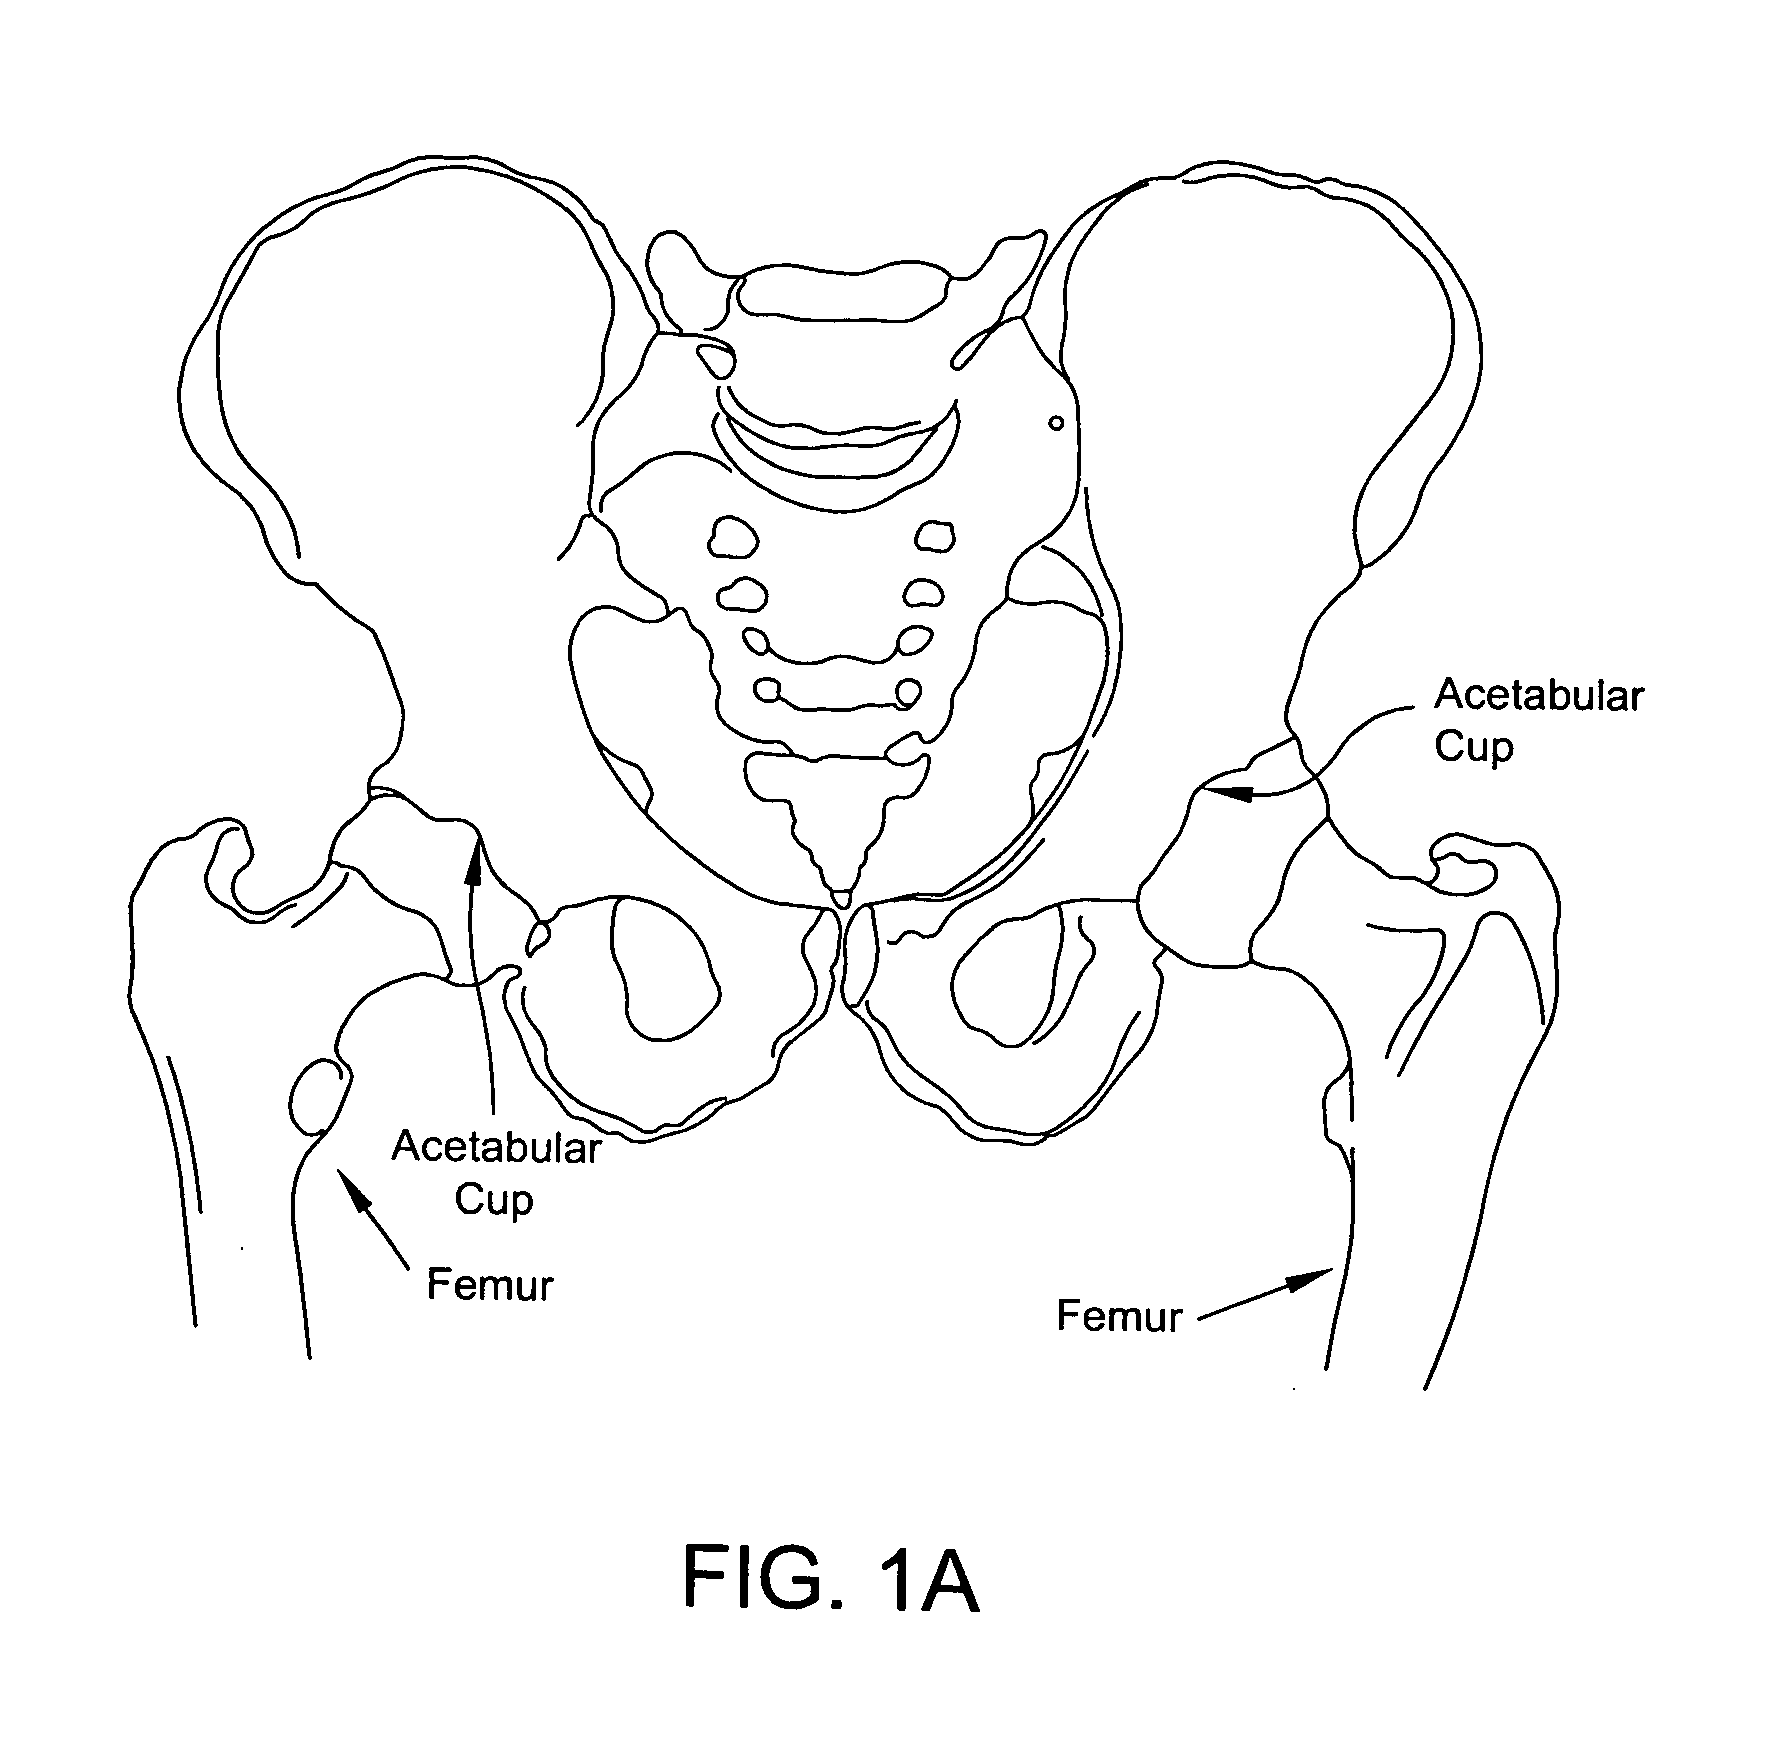 Methods and apparatus for performing an arthroscopic procedure using surgical navigation